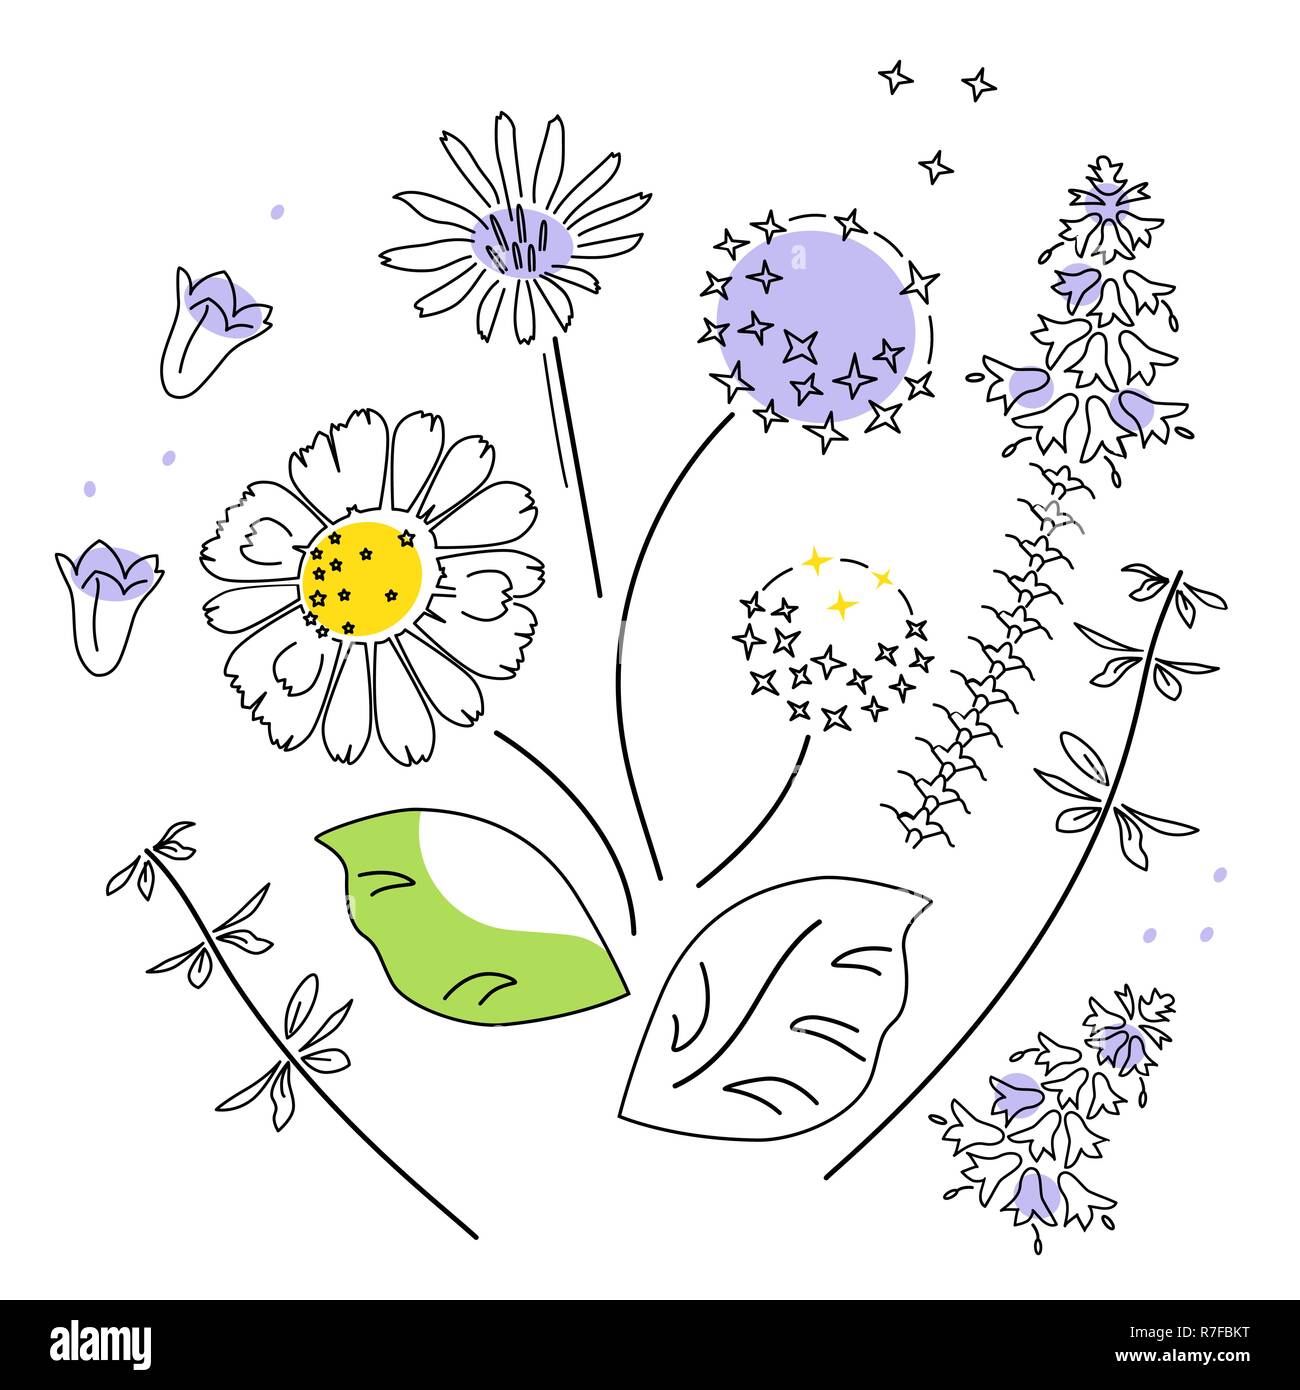 Print poster vector illustration about Field Flower isolated on White Background, element of pattern Stock Vector